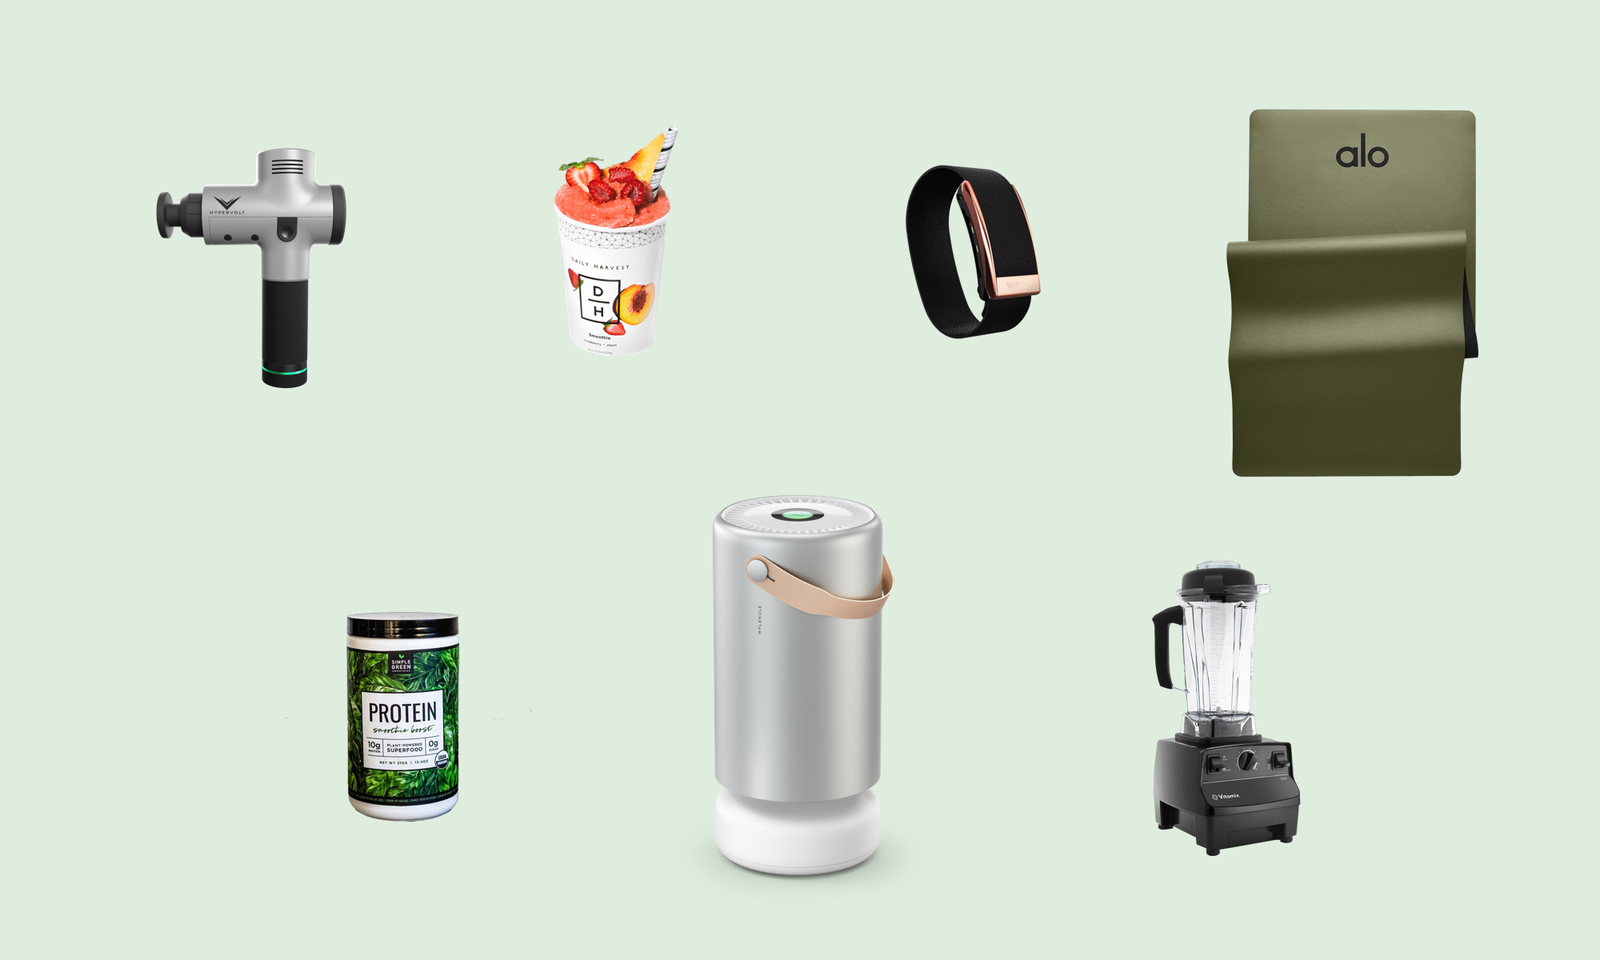 Gifts for wellness enthusiasts, including a personal massager, smoothie, watch, protein powder, Molekule air purifier, blender, and yoga mat